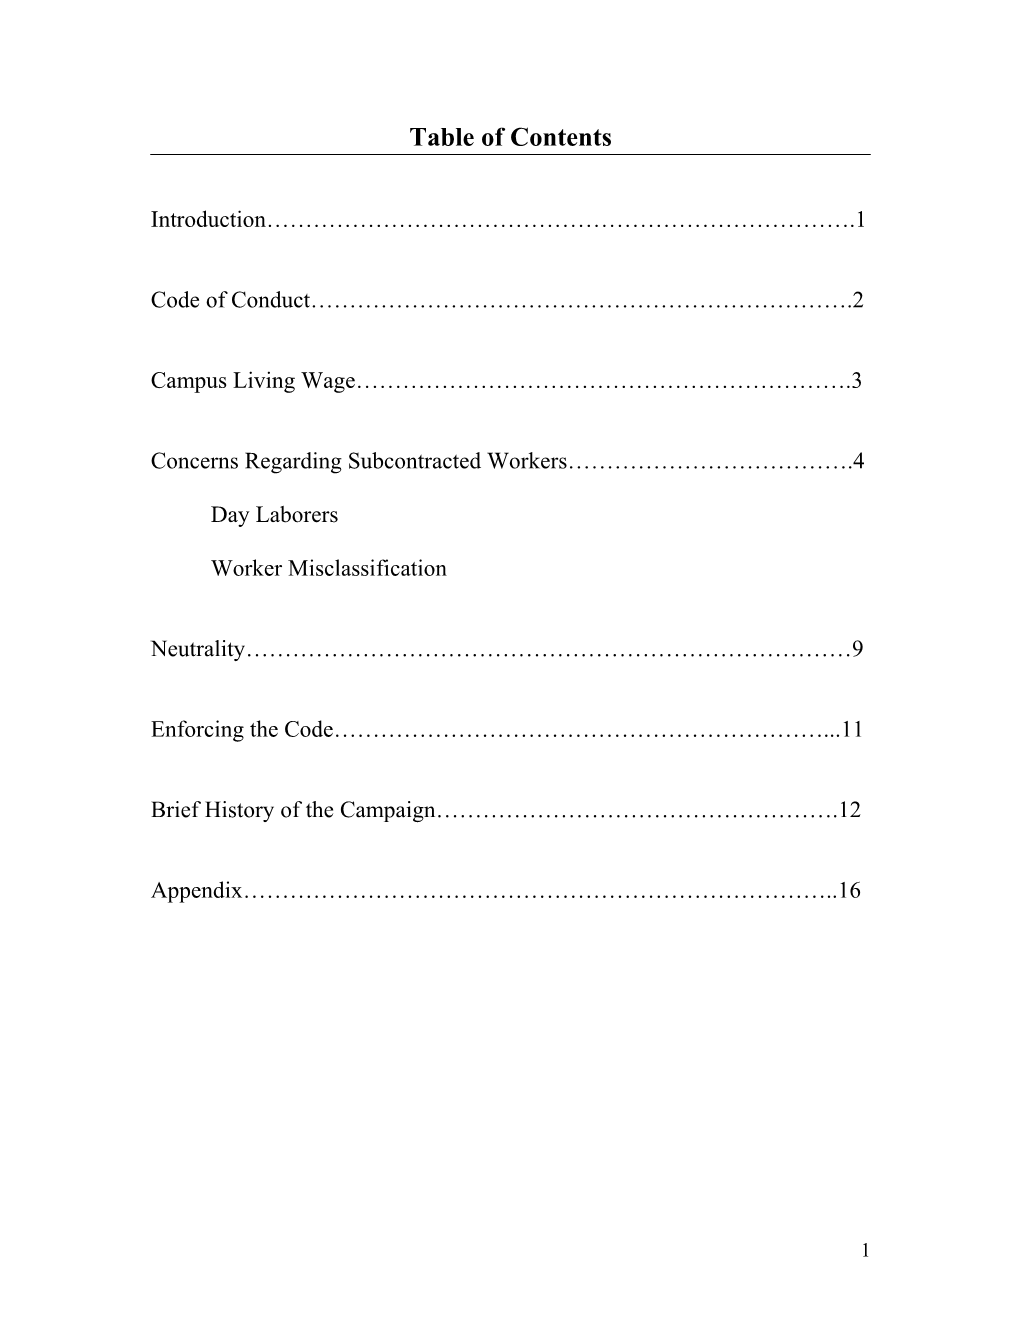 Table of Contents s128